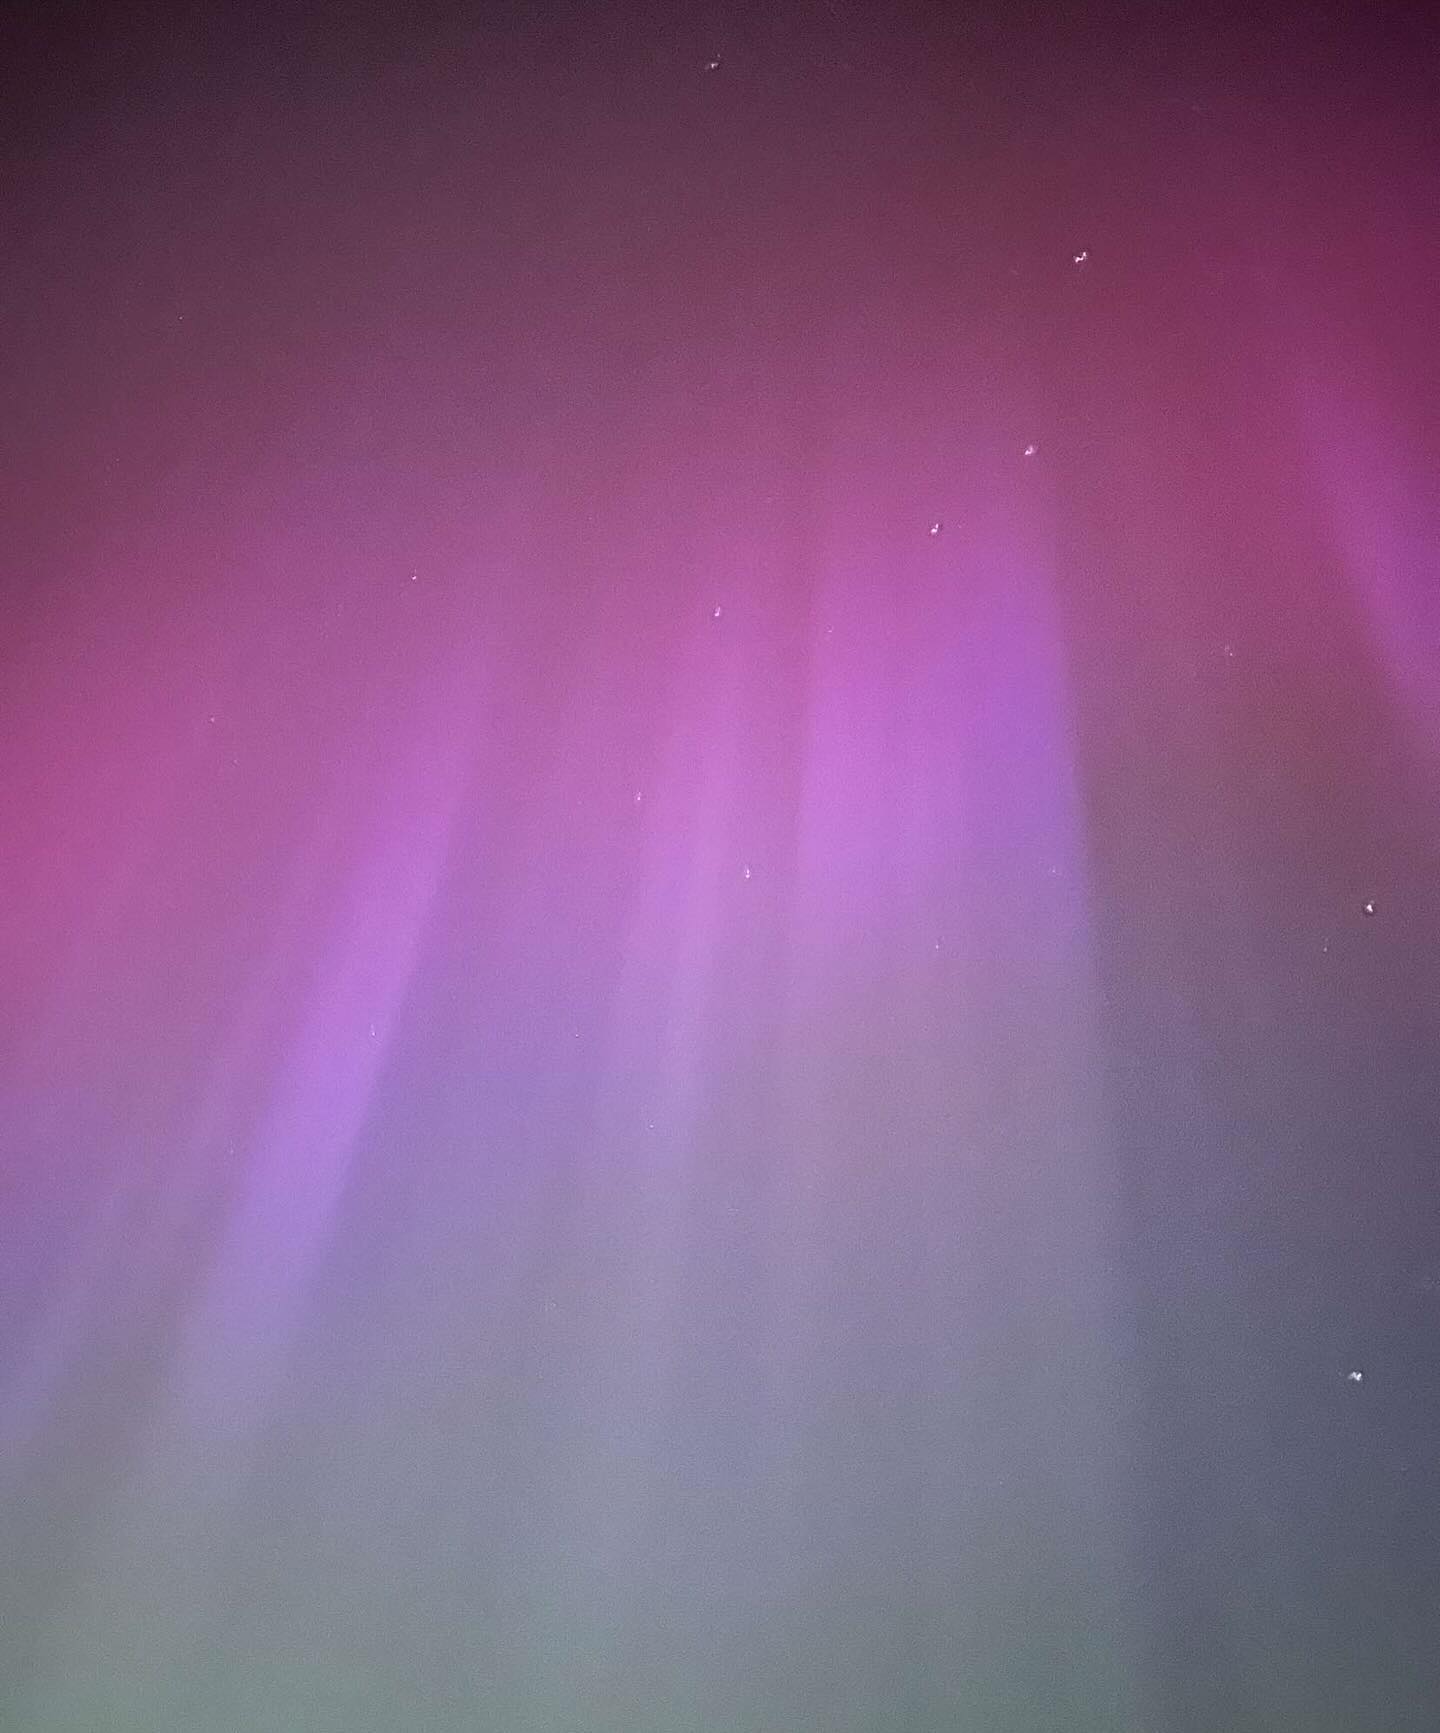 Had to screen record my camera to see this! Can’t believe we had the chance to see this where I am 🔥 #aurora #auroraborealis #northernlights #nightphotography #nightsky